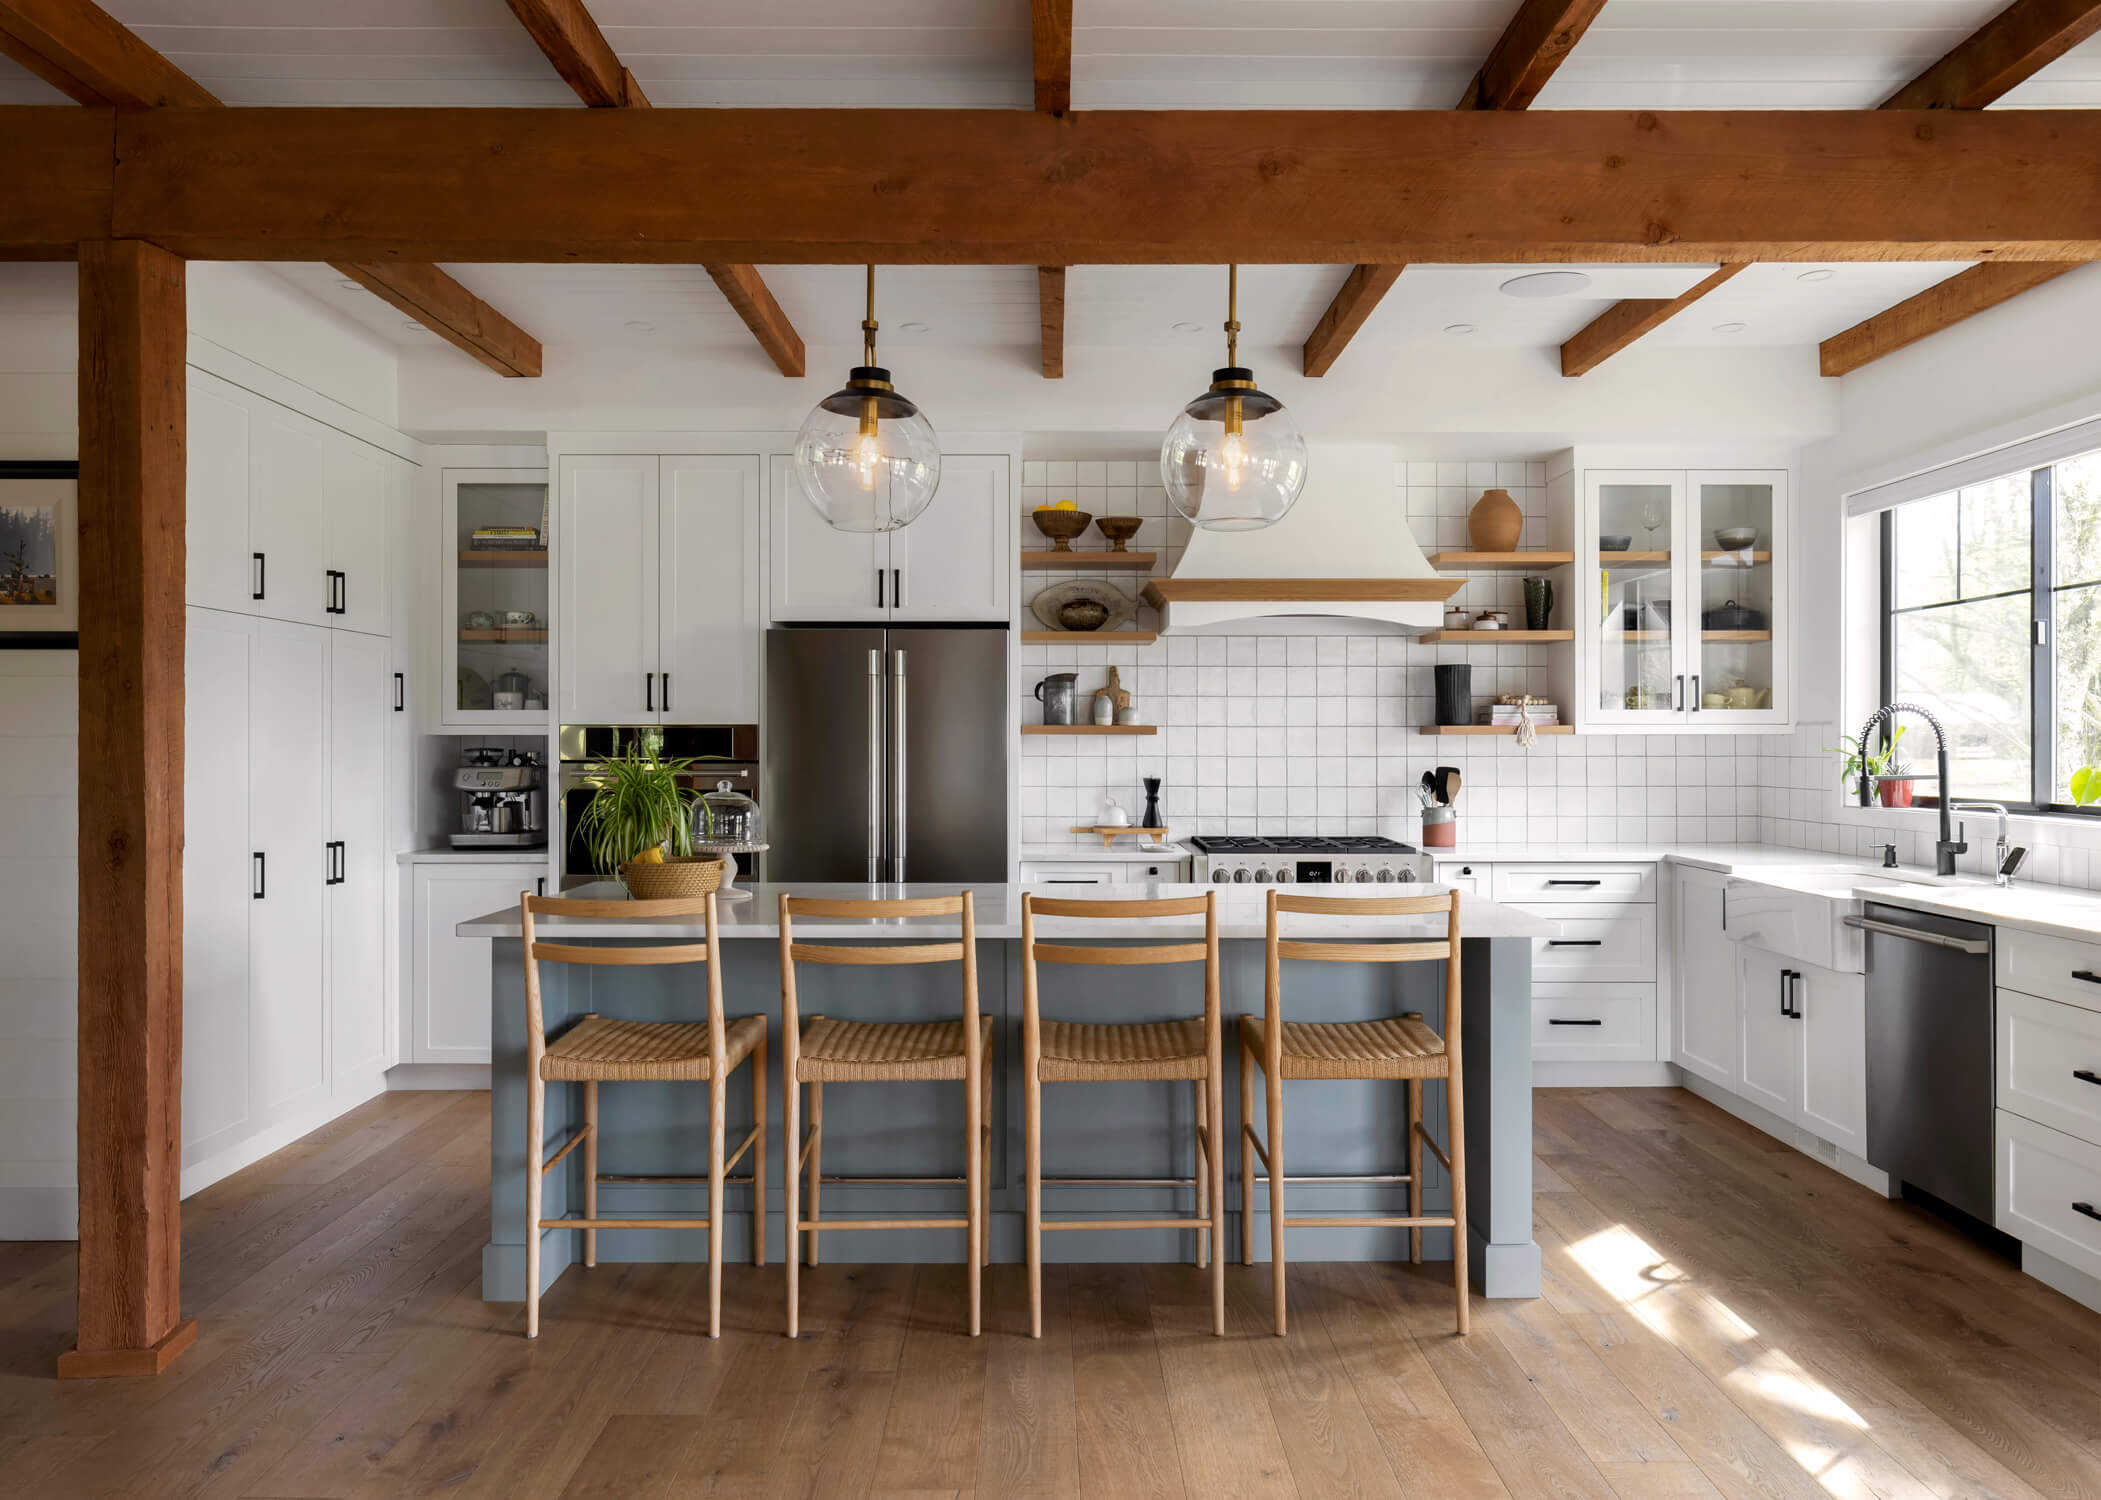 Exposed reclaimed wooden beams accent the newly constructed bright modern kitchen.